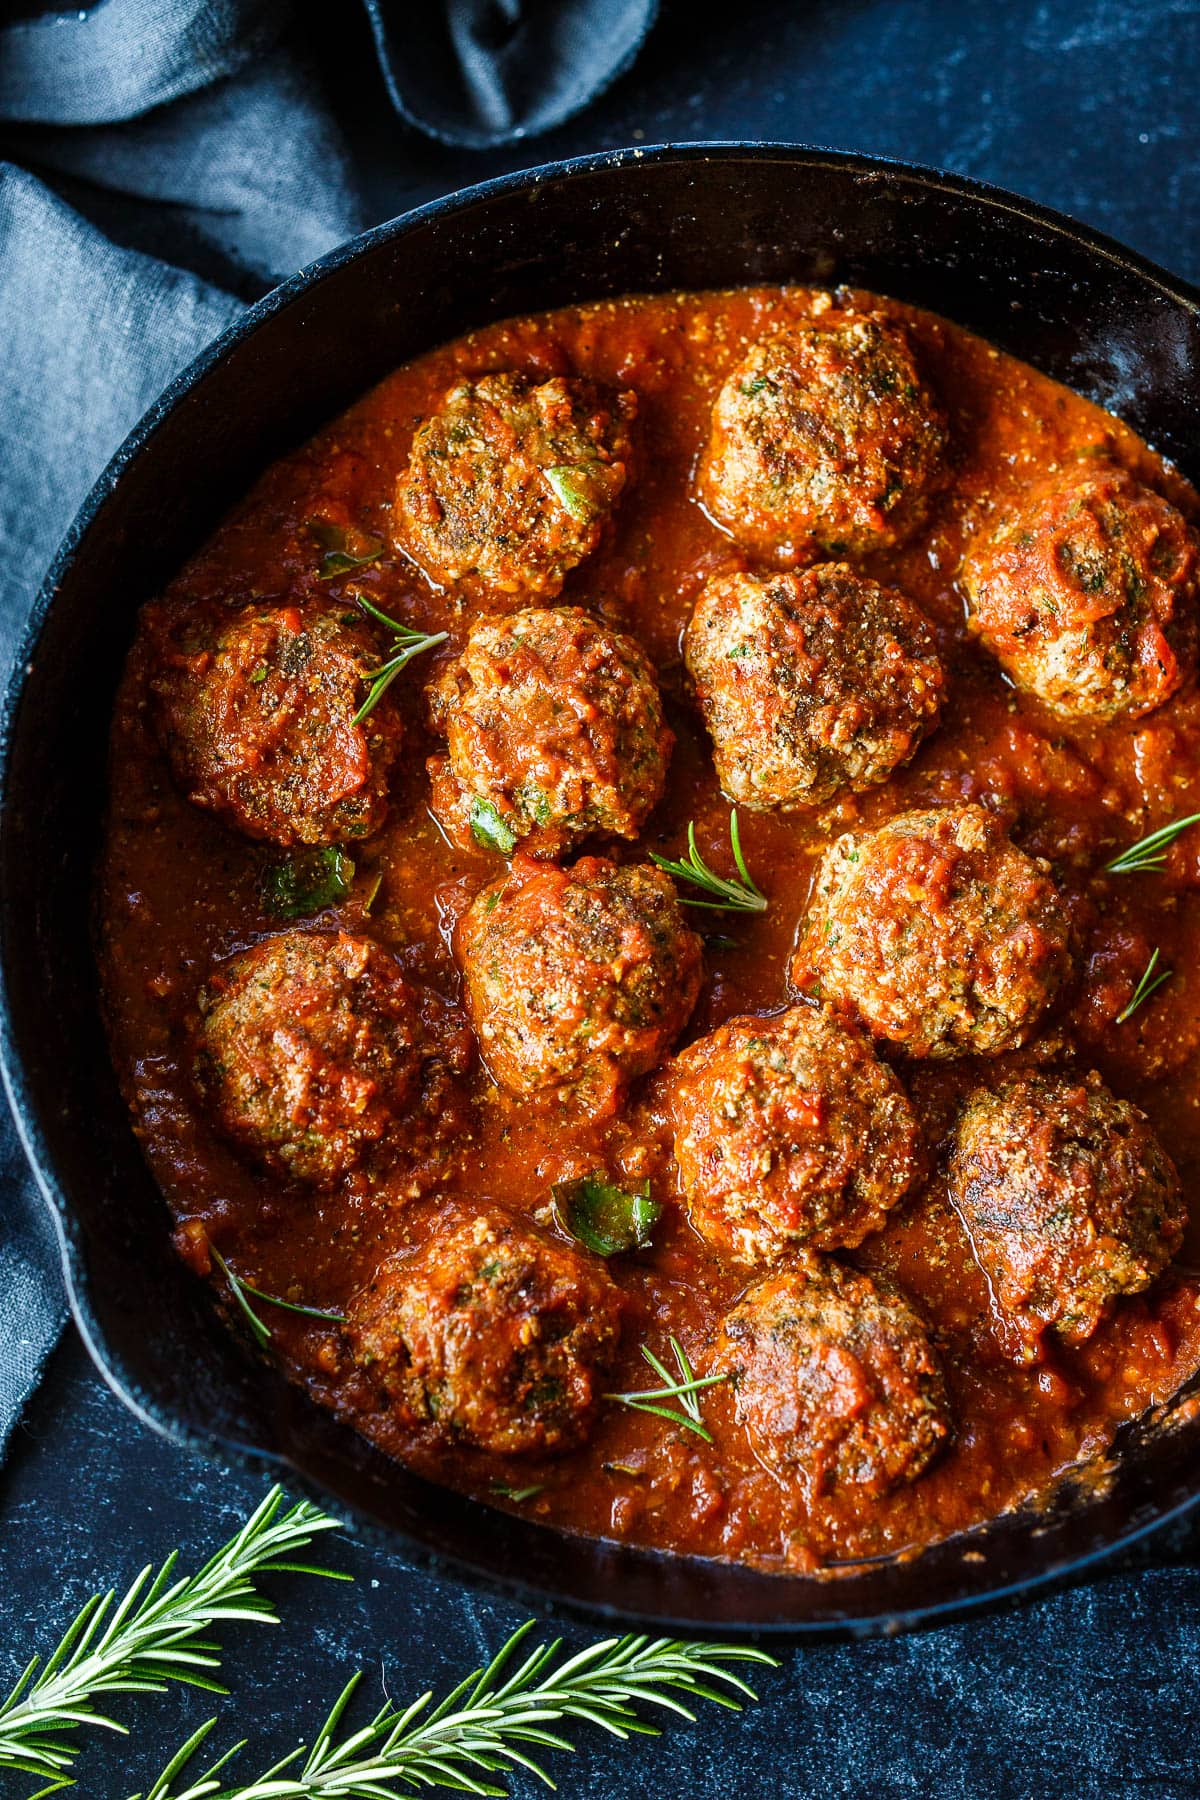 These flavorful Italian Meatballs are chock full of fresh herbs and savory goodness.  Fast and easy they can be made in 30 minutes. Serve them with zucchini noodles, roasted spaghetti squash, pasta, creamy polenta or in a roll. Low-carb, keto and gluten-free.